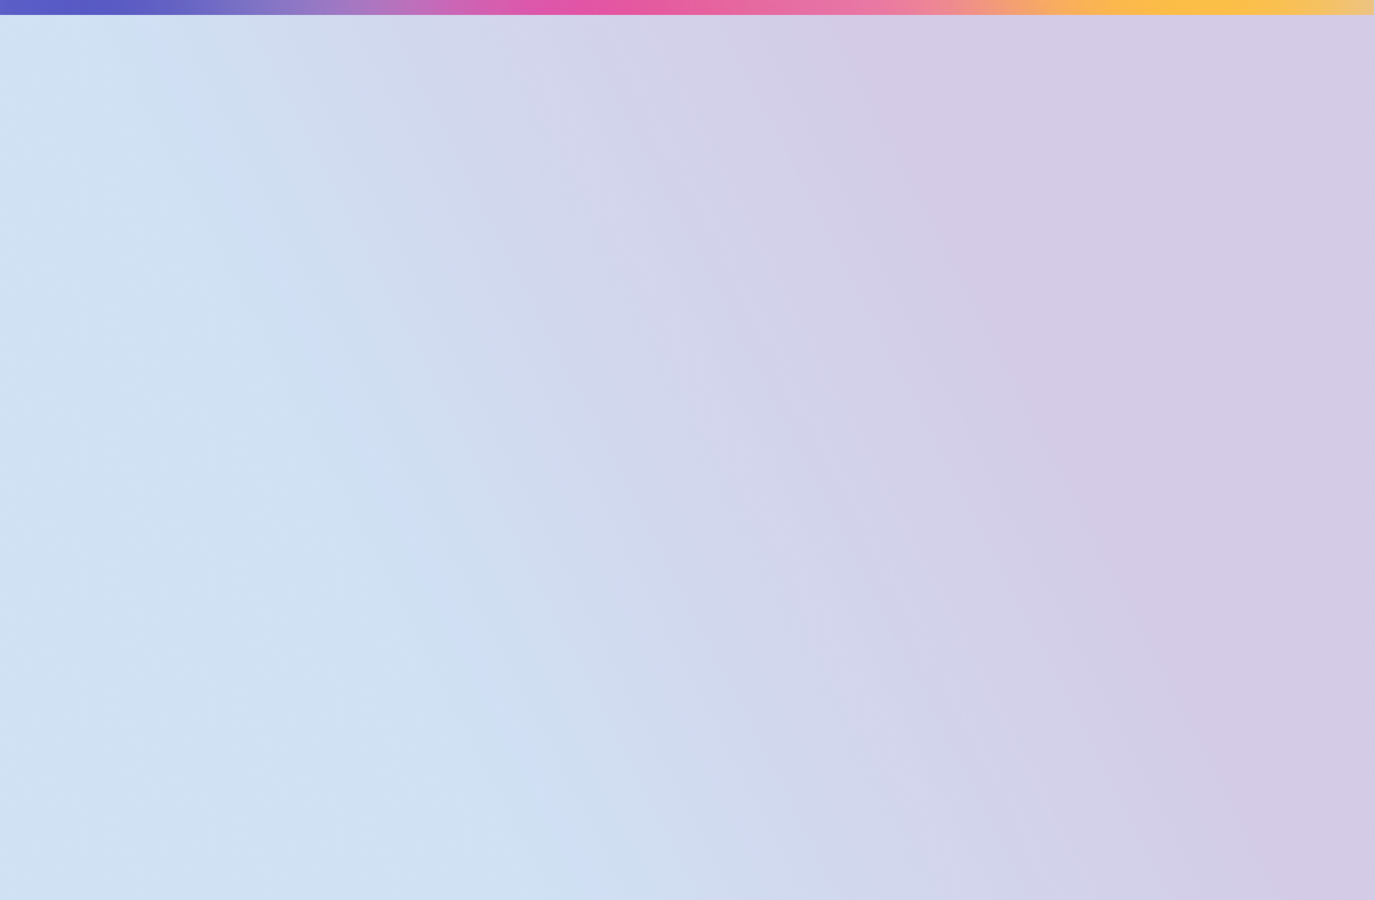 Light Blue to Pink Gradient Background